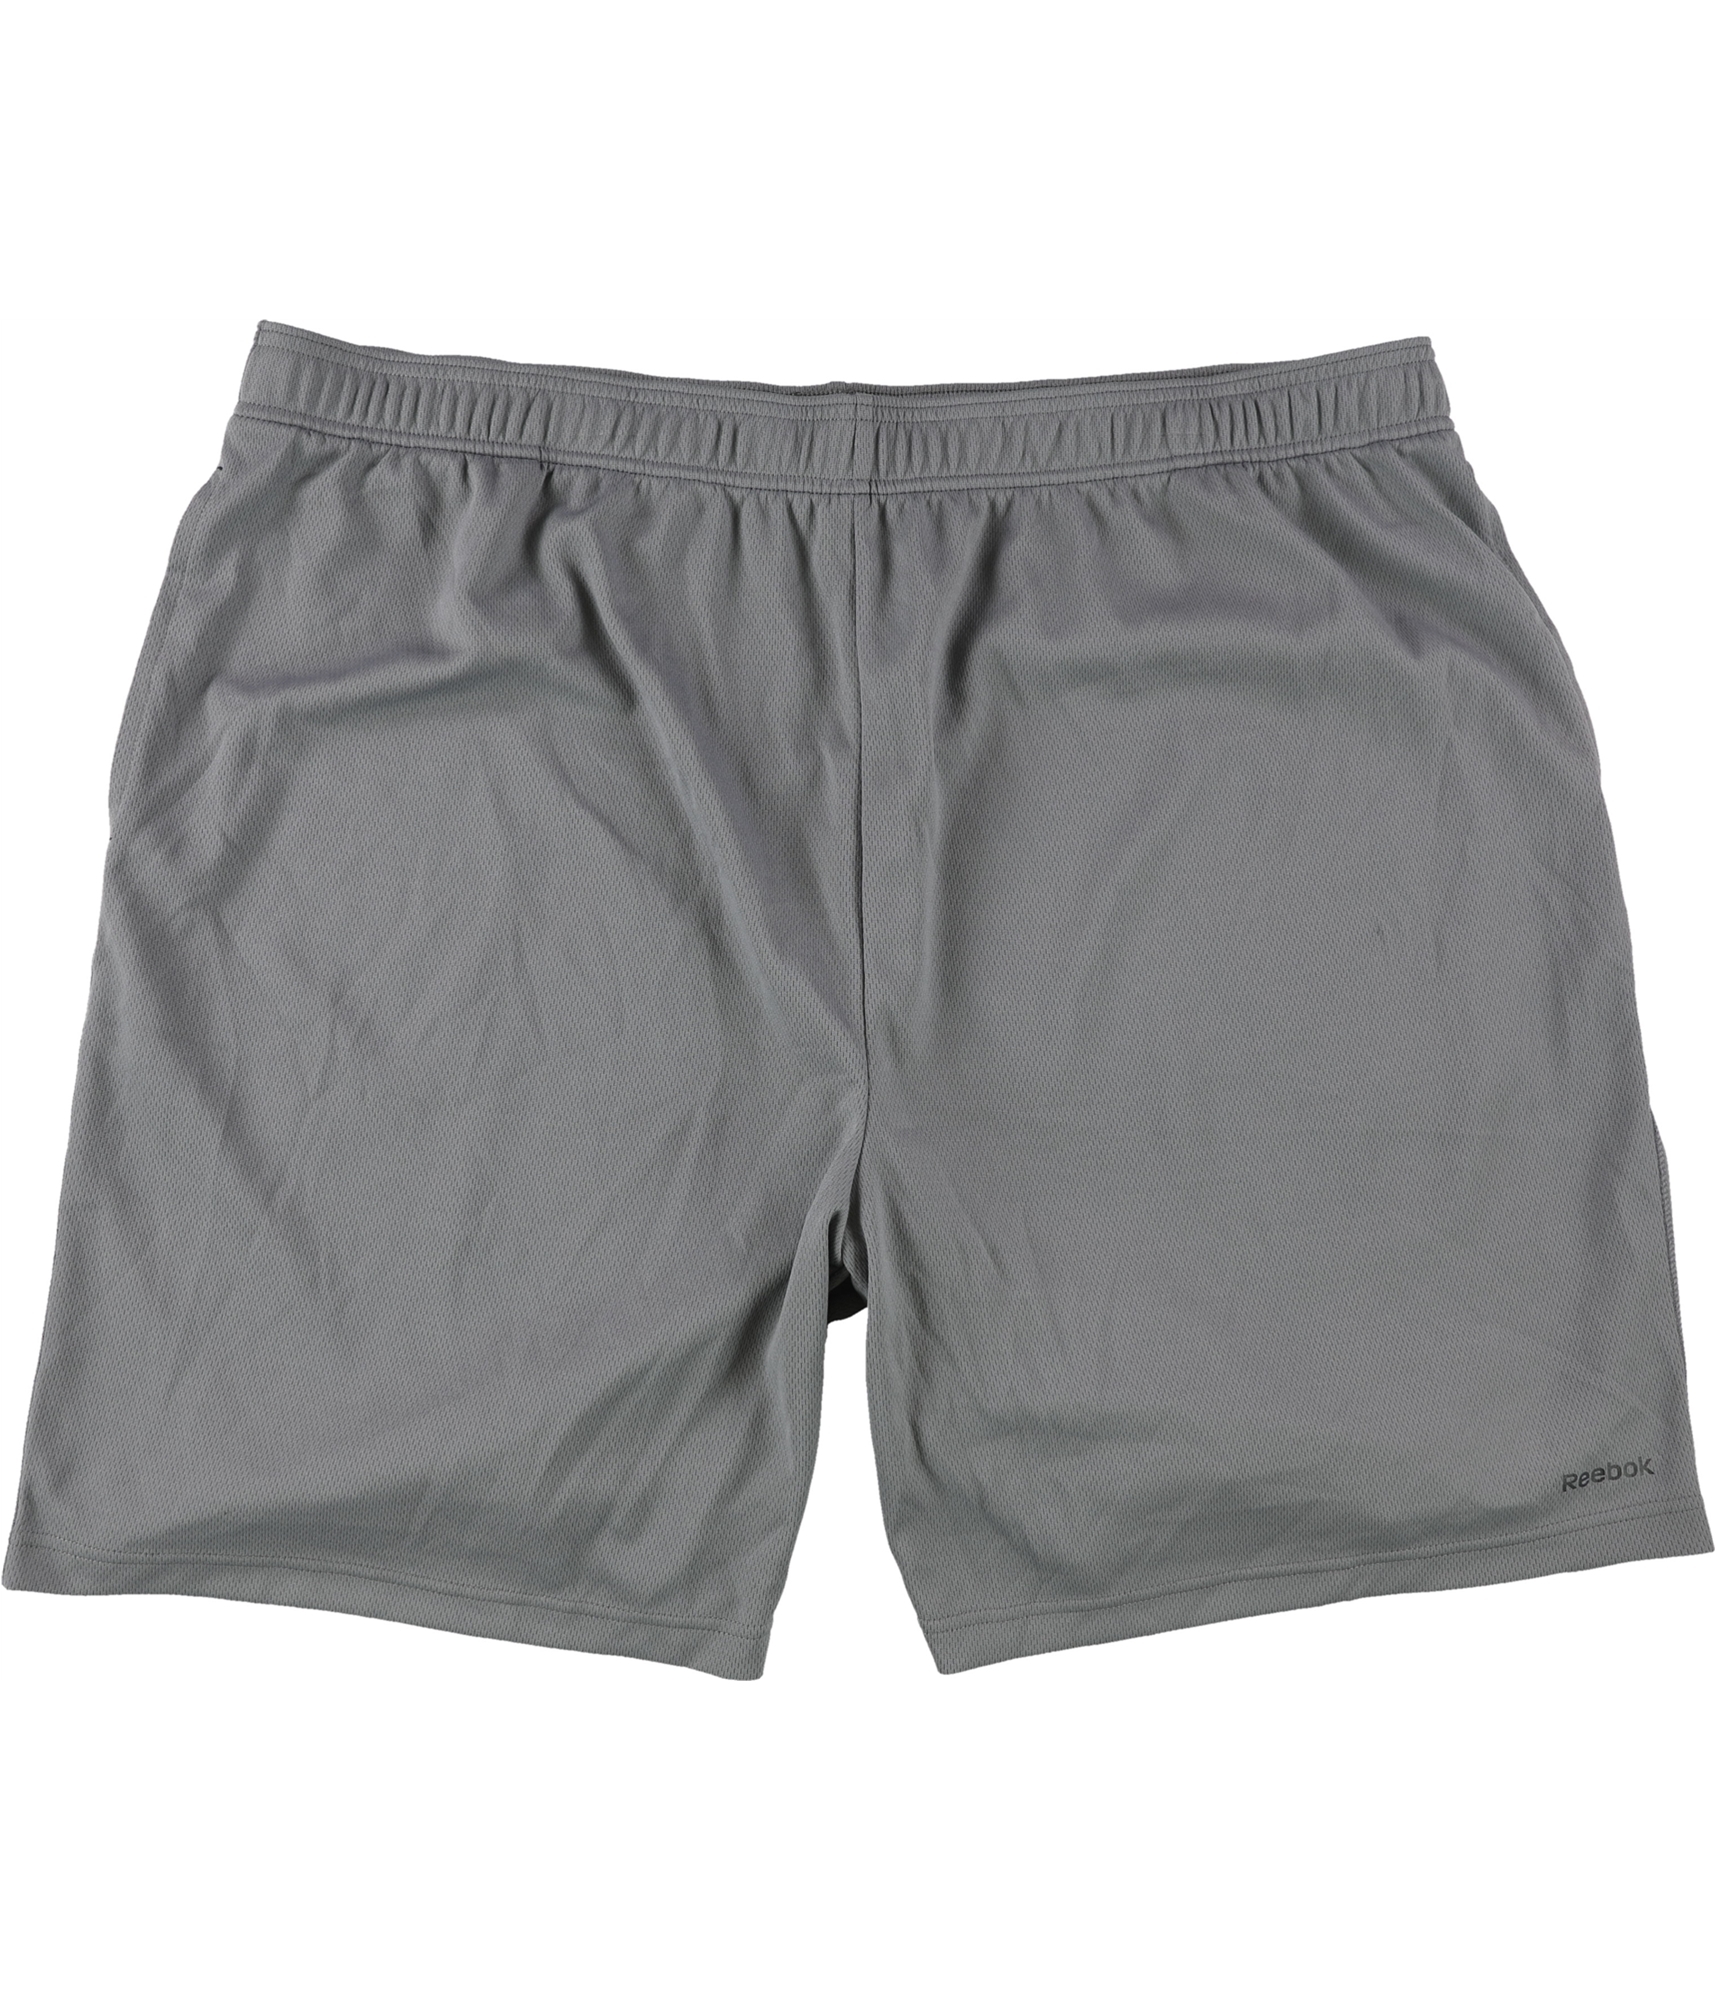 Buy a Mens Reebok Dry sports Workout Shorts Online TagsWeekly.com